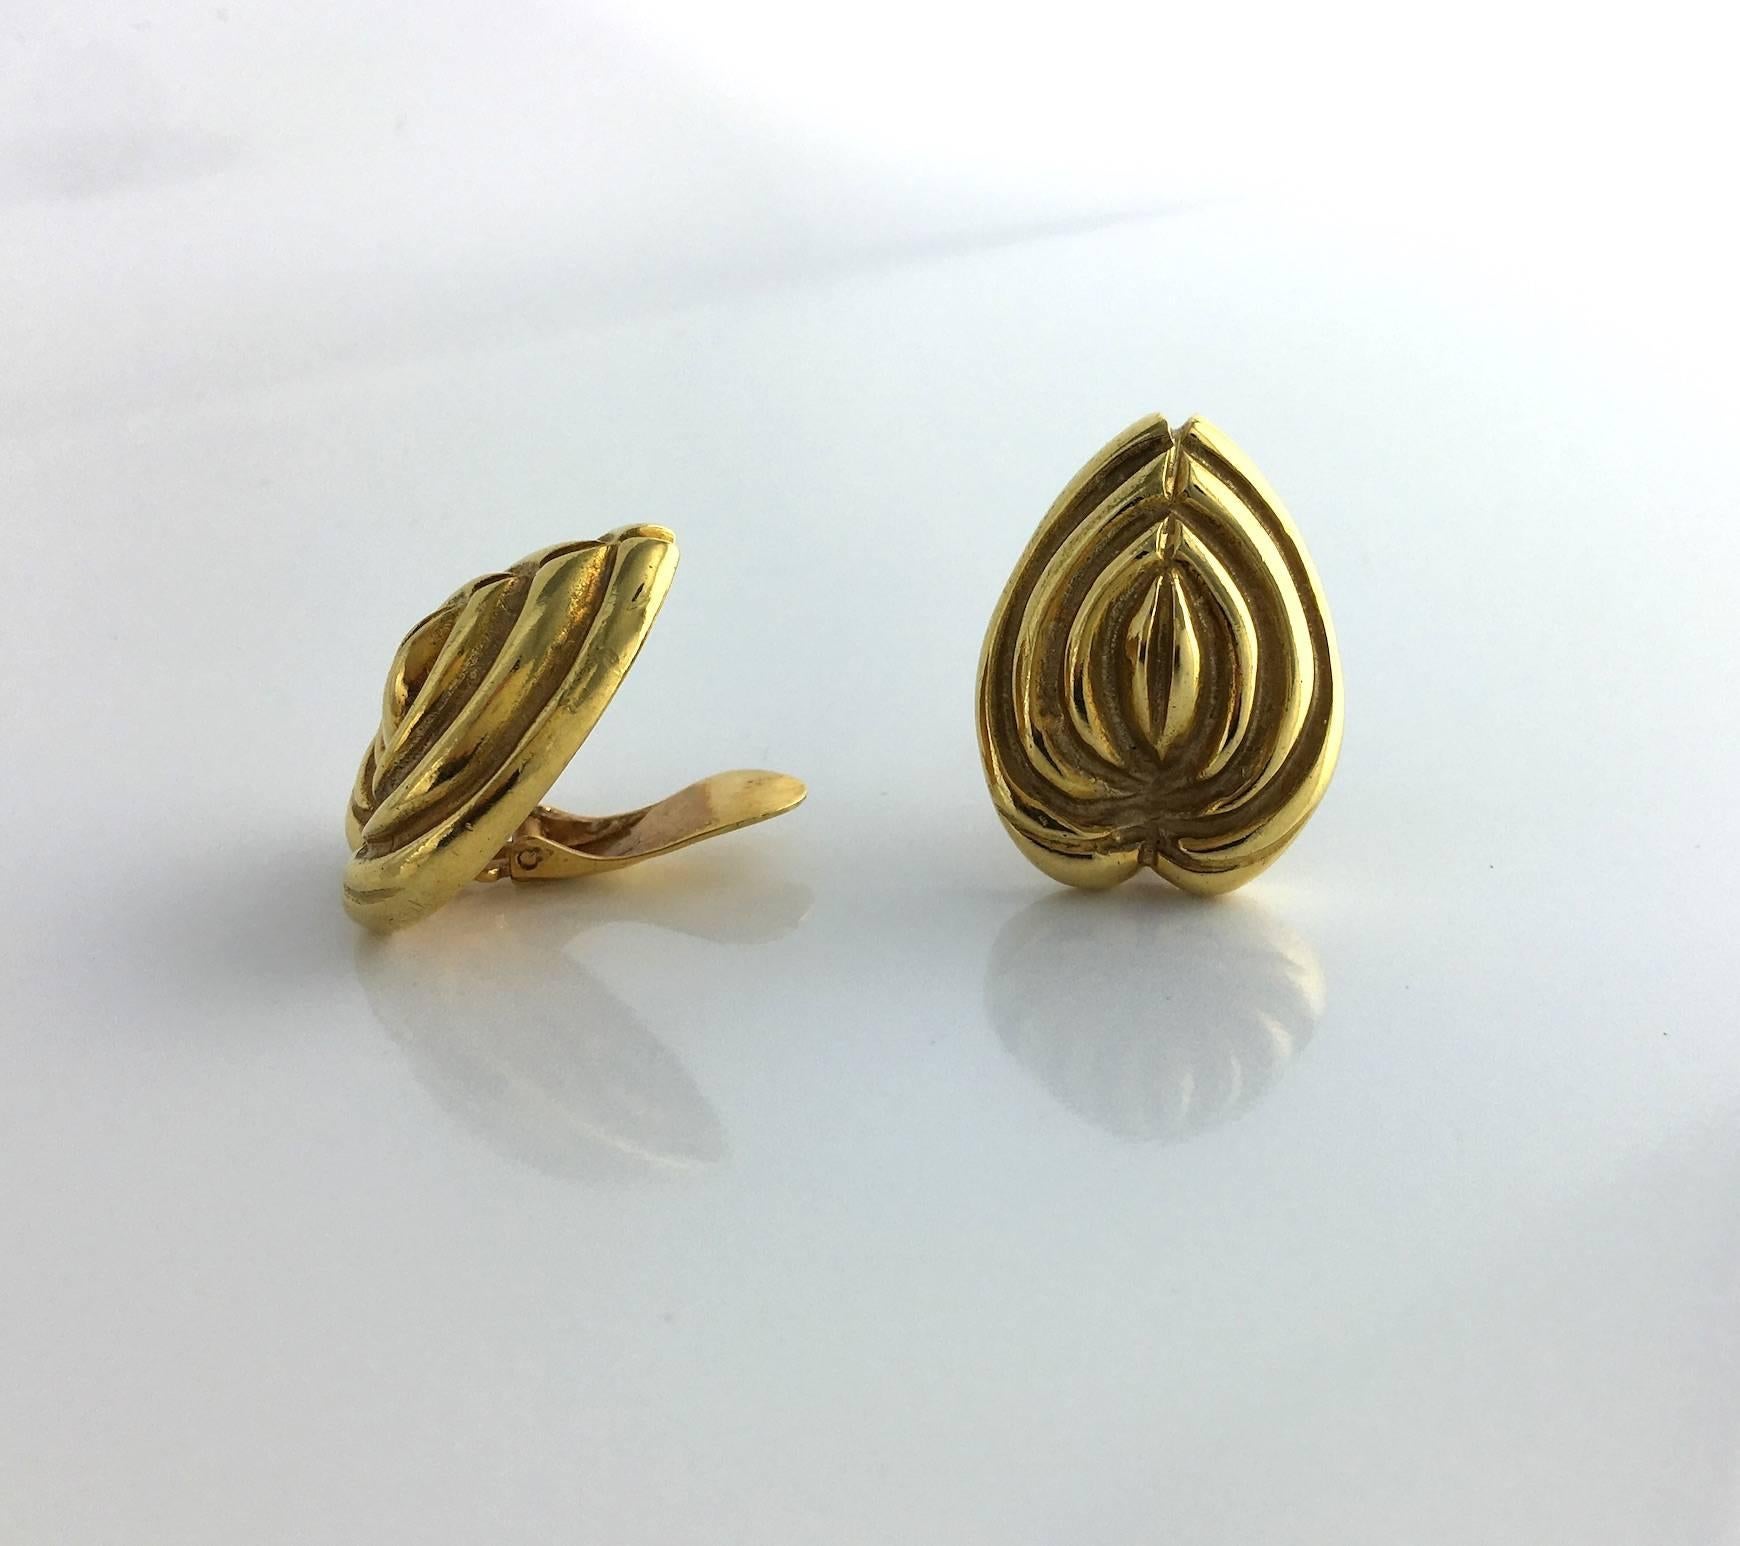 Significant yellow Gold Earrings.  
Circa 1980. 
Signed Ilias Lalaounis.  

Height: 1.18 inch. (3.- centimeters) 
Width: 0.83 inch. (2.1 centimeters) 

Gross weight: 29.58 grams.